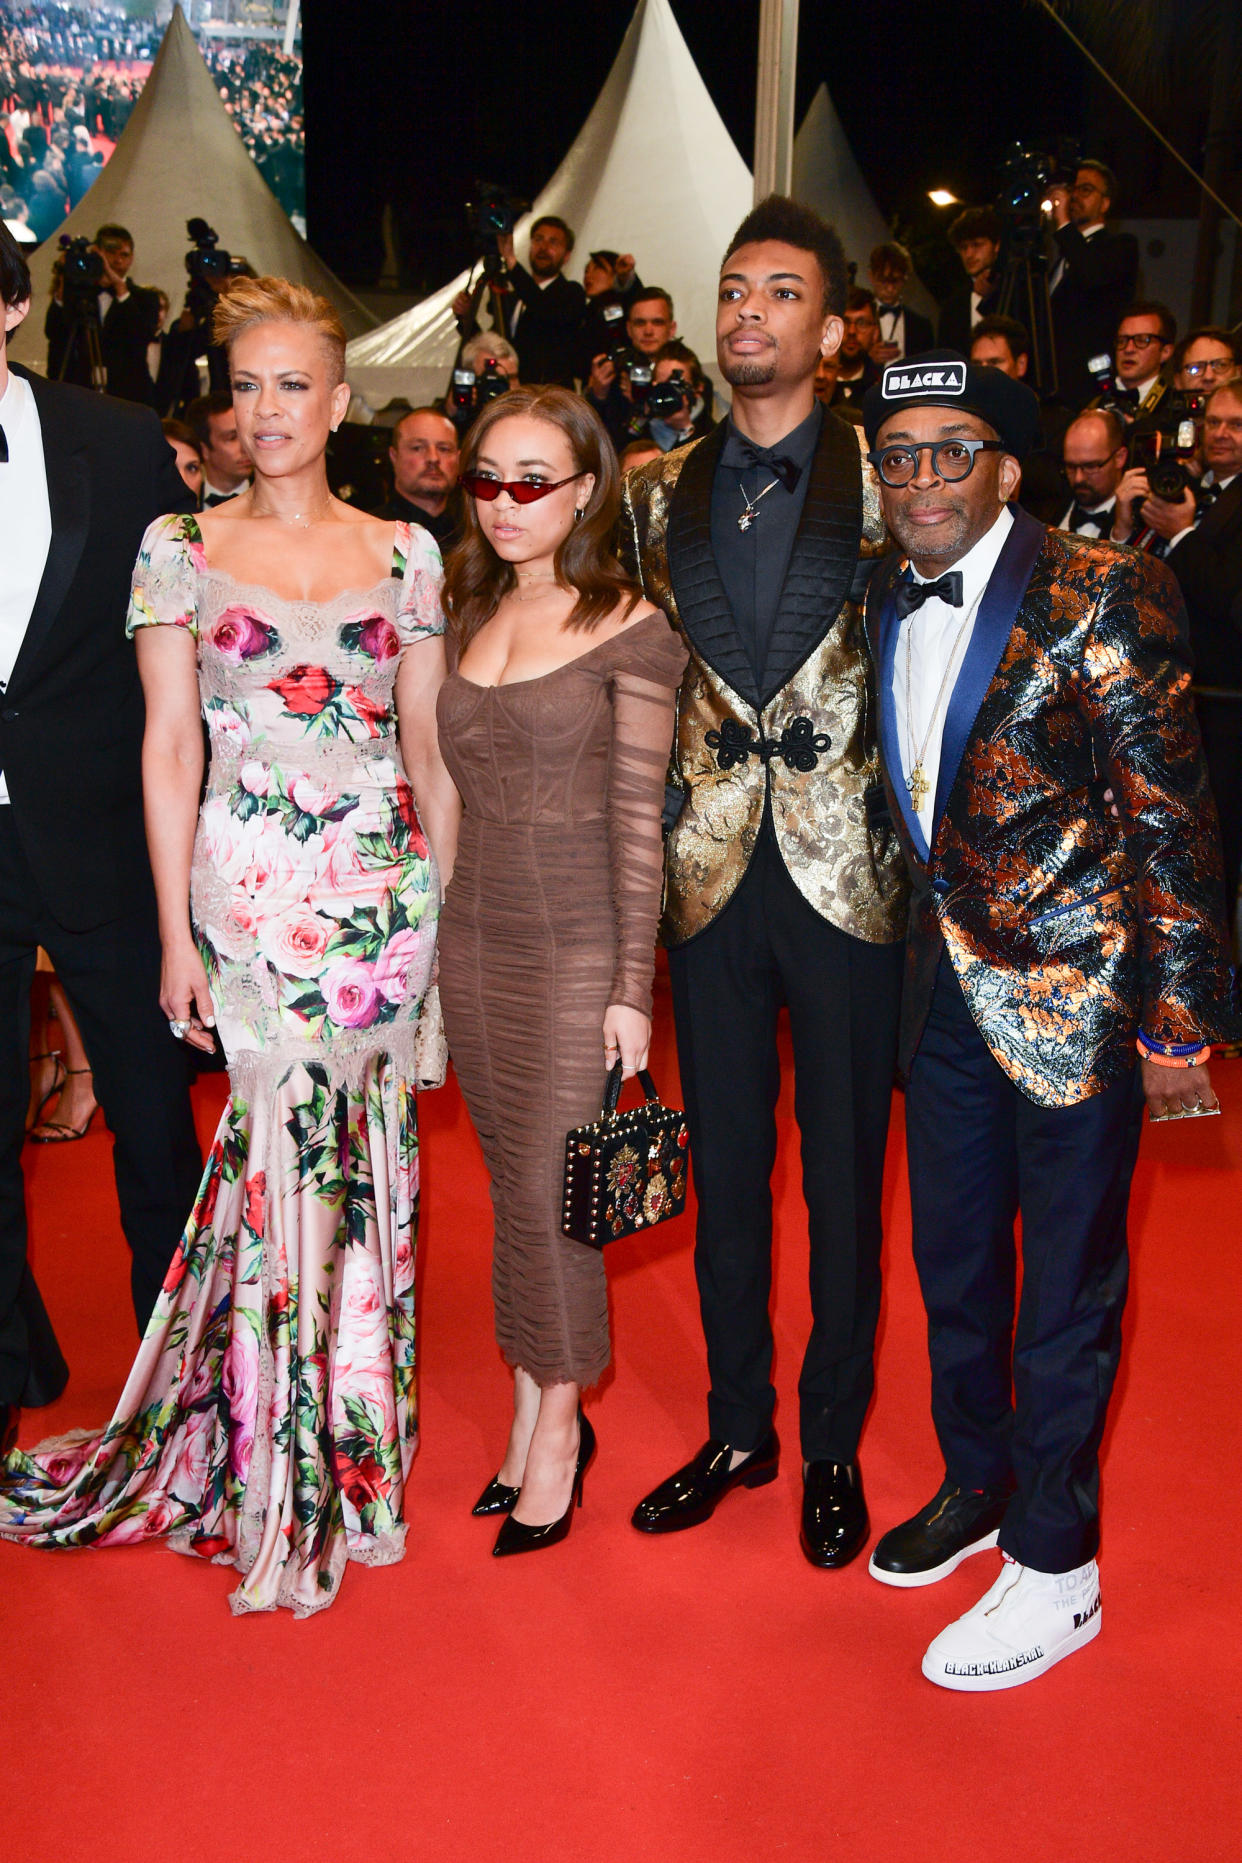 CANNES, FRANCE - MAY 14: Tonya Lewis Lee, Sarchel Lee, Jackson Lee and director Spike Lee  depart the screening of 'BlacKkKlansman' during the 71st annual Cannes Film Festival at Palais des Festivals on May 14, 2018 in Cannes, France.  (Photo by George Pimentel/WireImage)